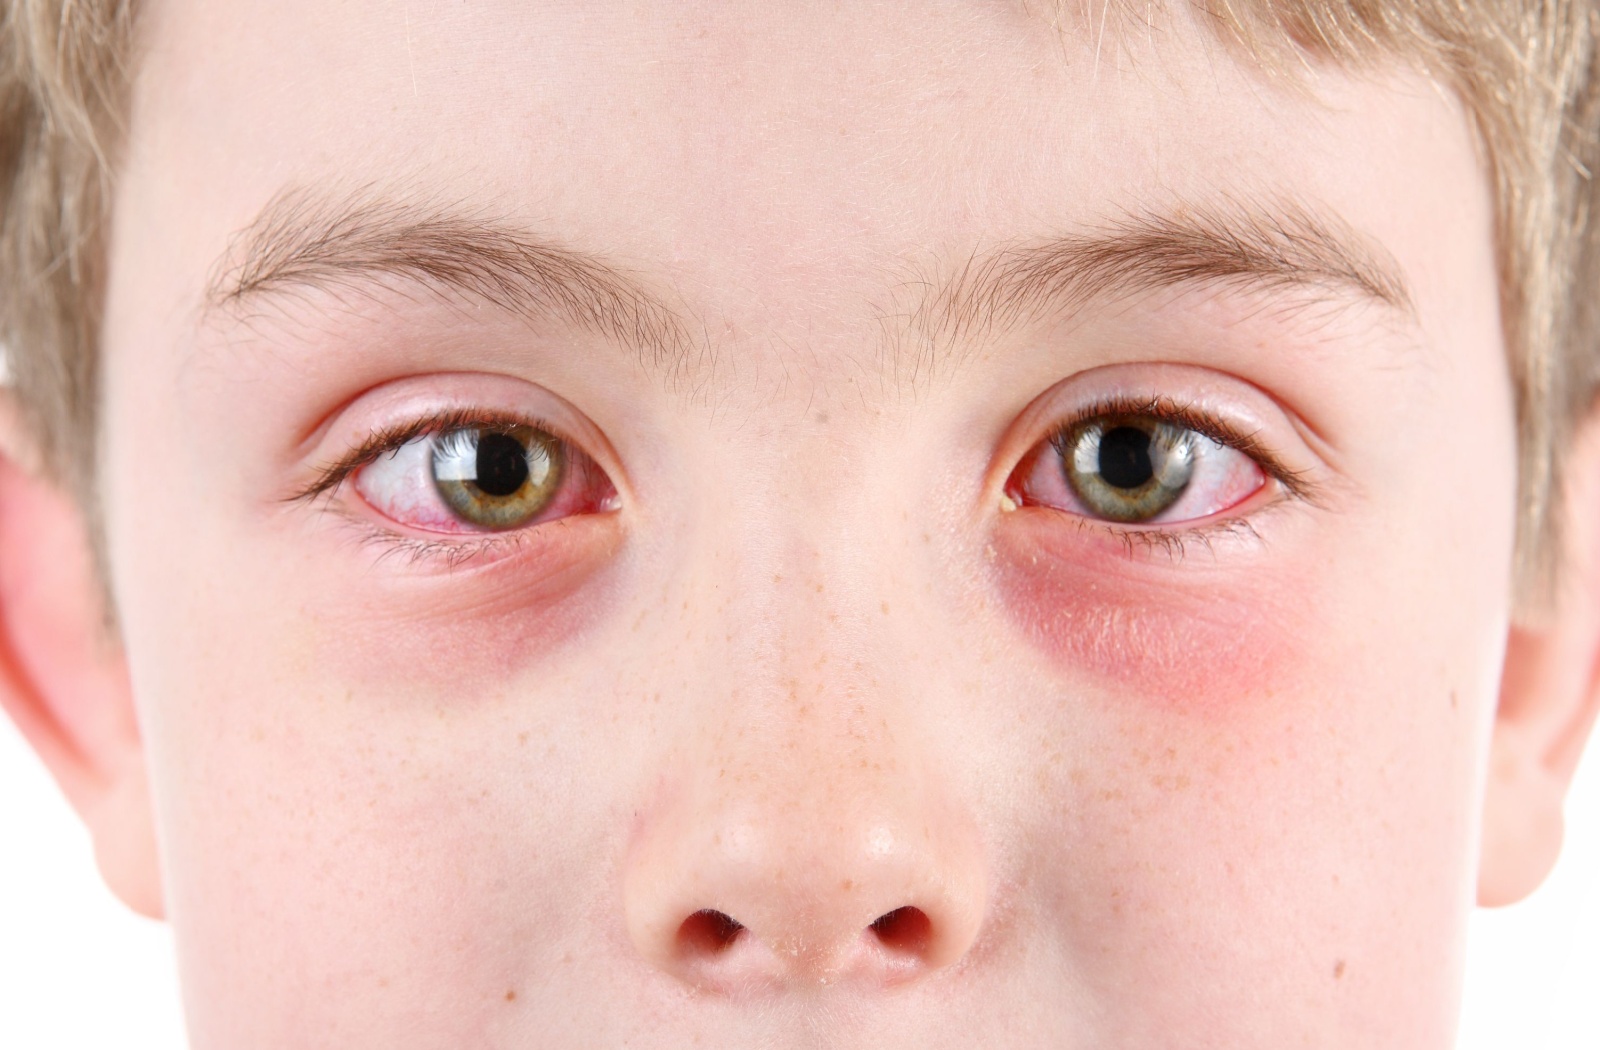 A close-up of a young boy's eyes that are red due to pink eye.